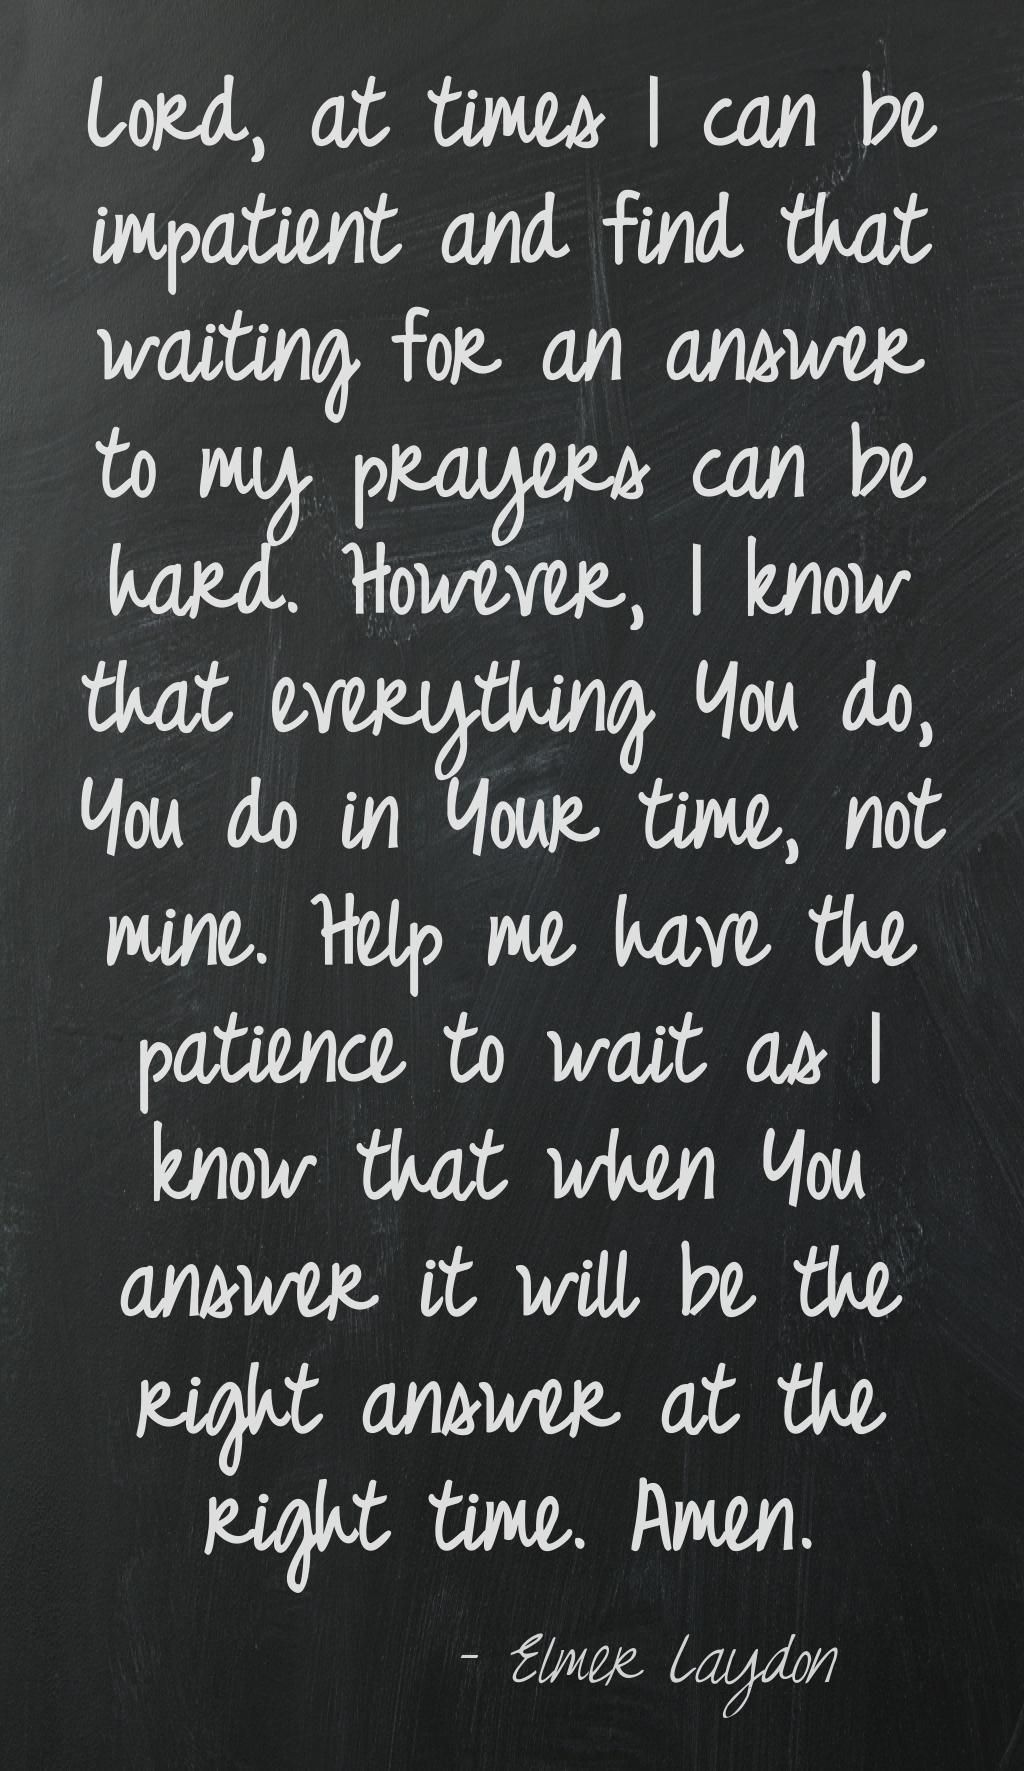 Wow…this is EXACTLY what I’ve been wanting to hear. Thank you Jesus for answering me today :)